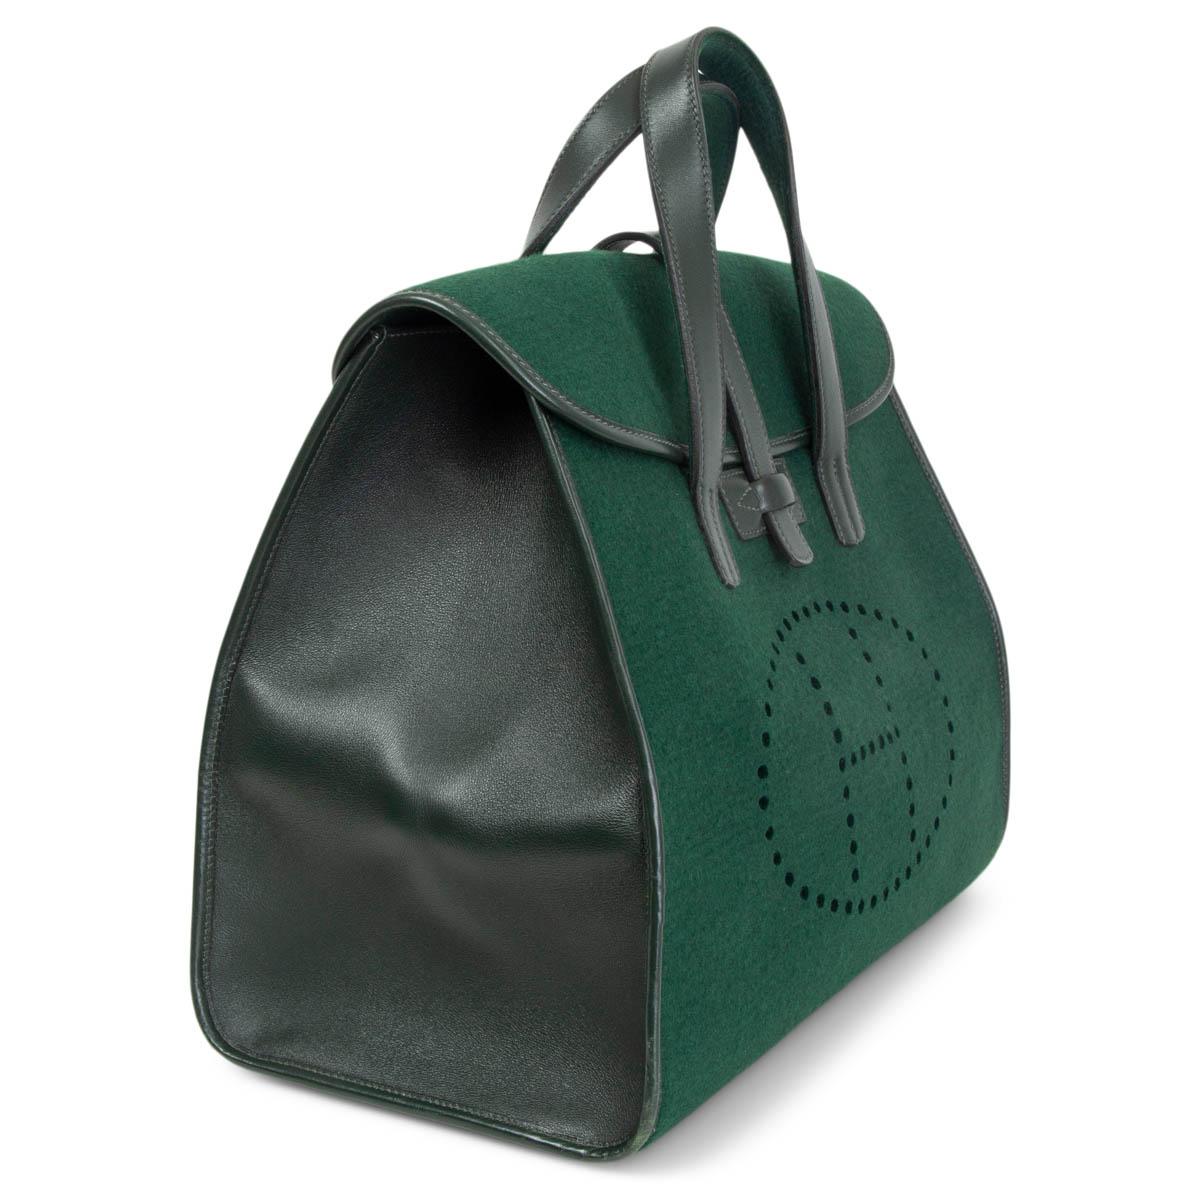 100% authentic Hermès Feu2dou Tote in Vert Fonce Feutre (felt) and Gulliver Leather. Perforated 